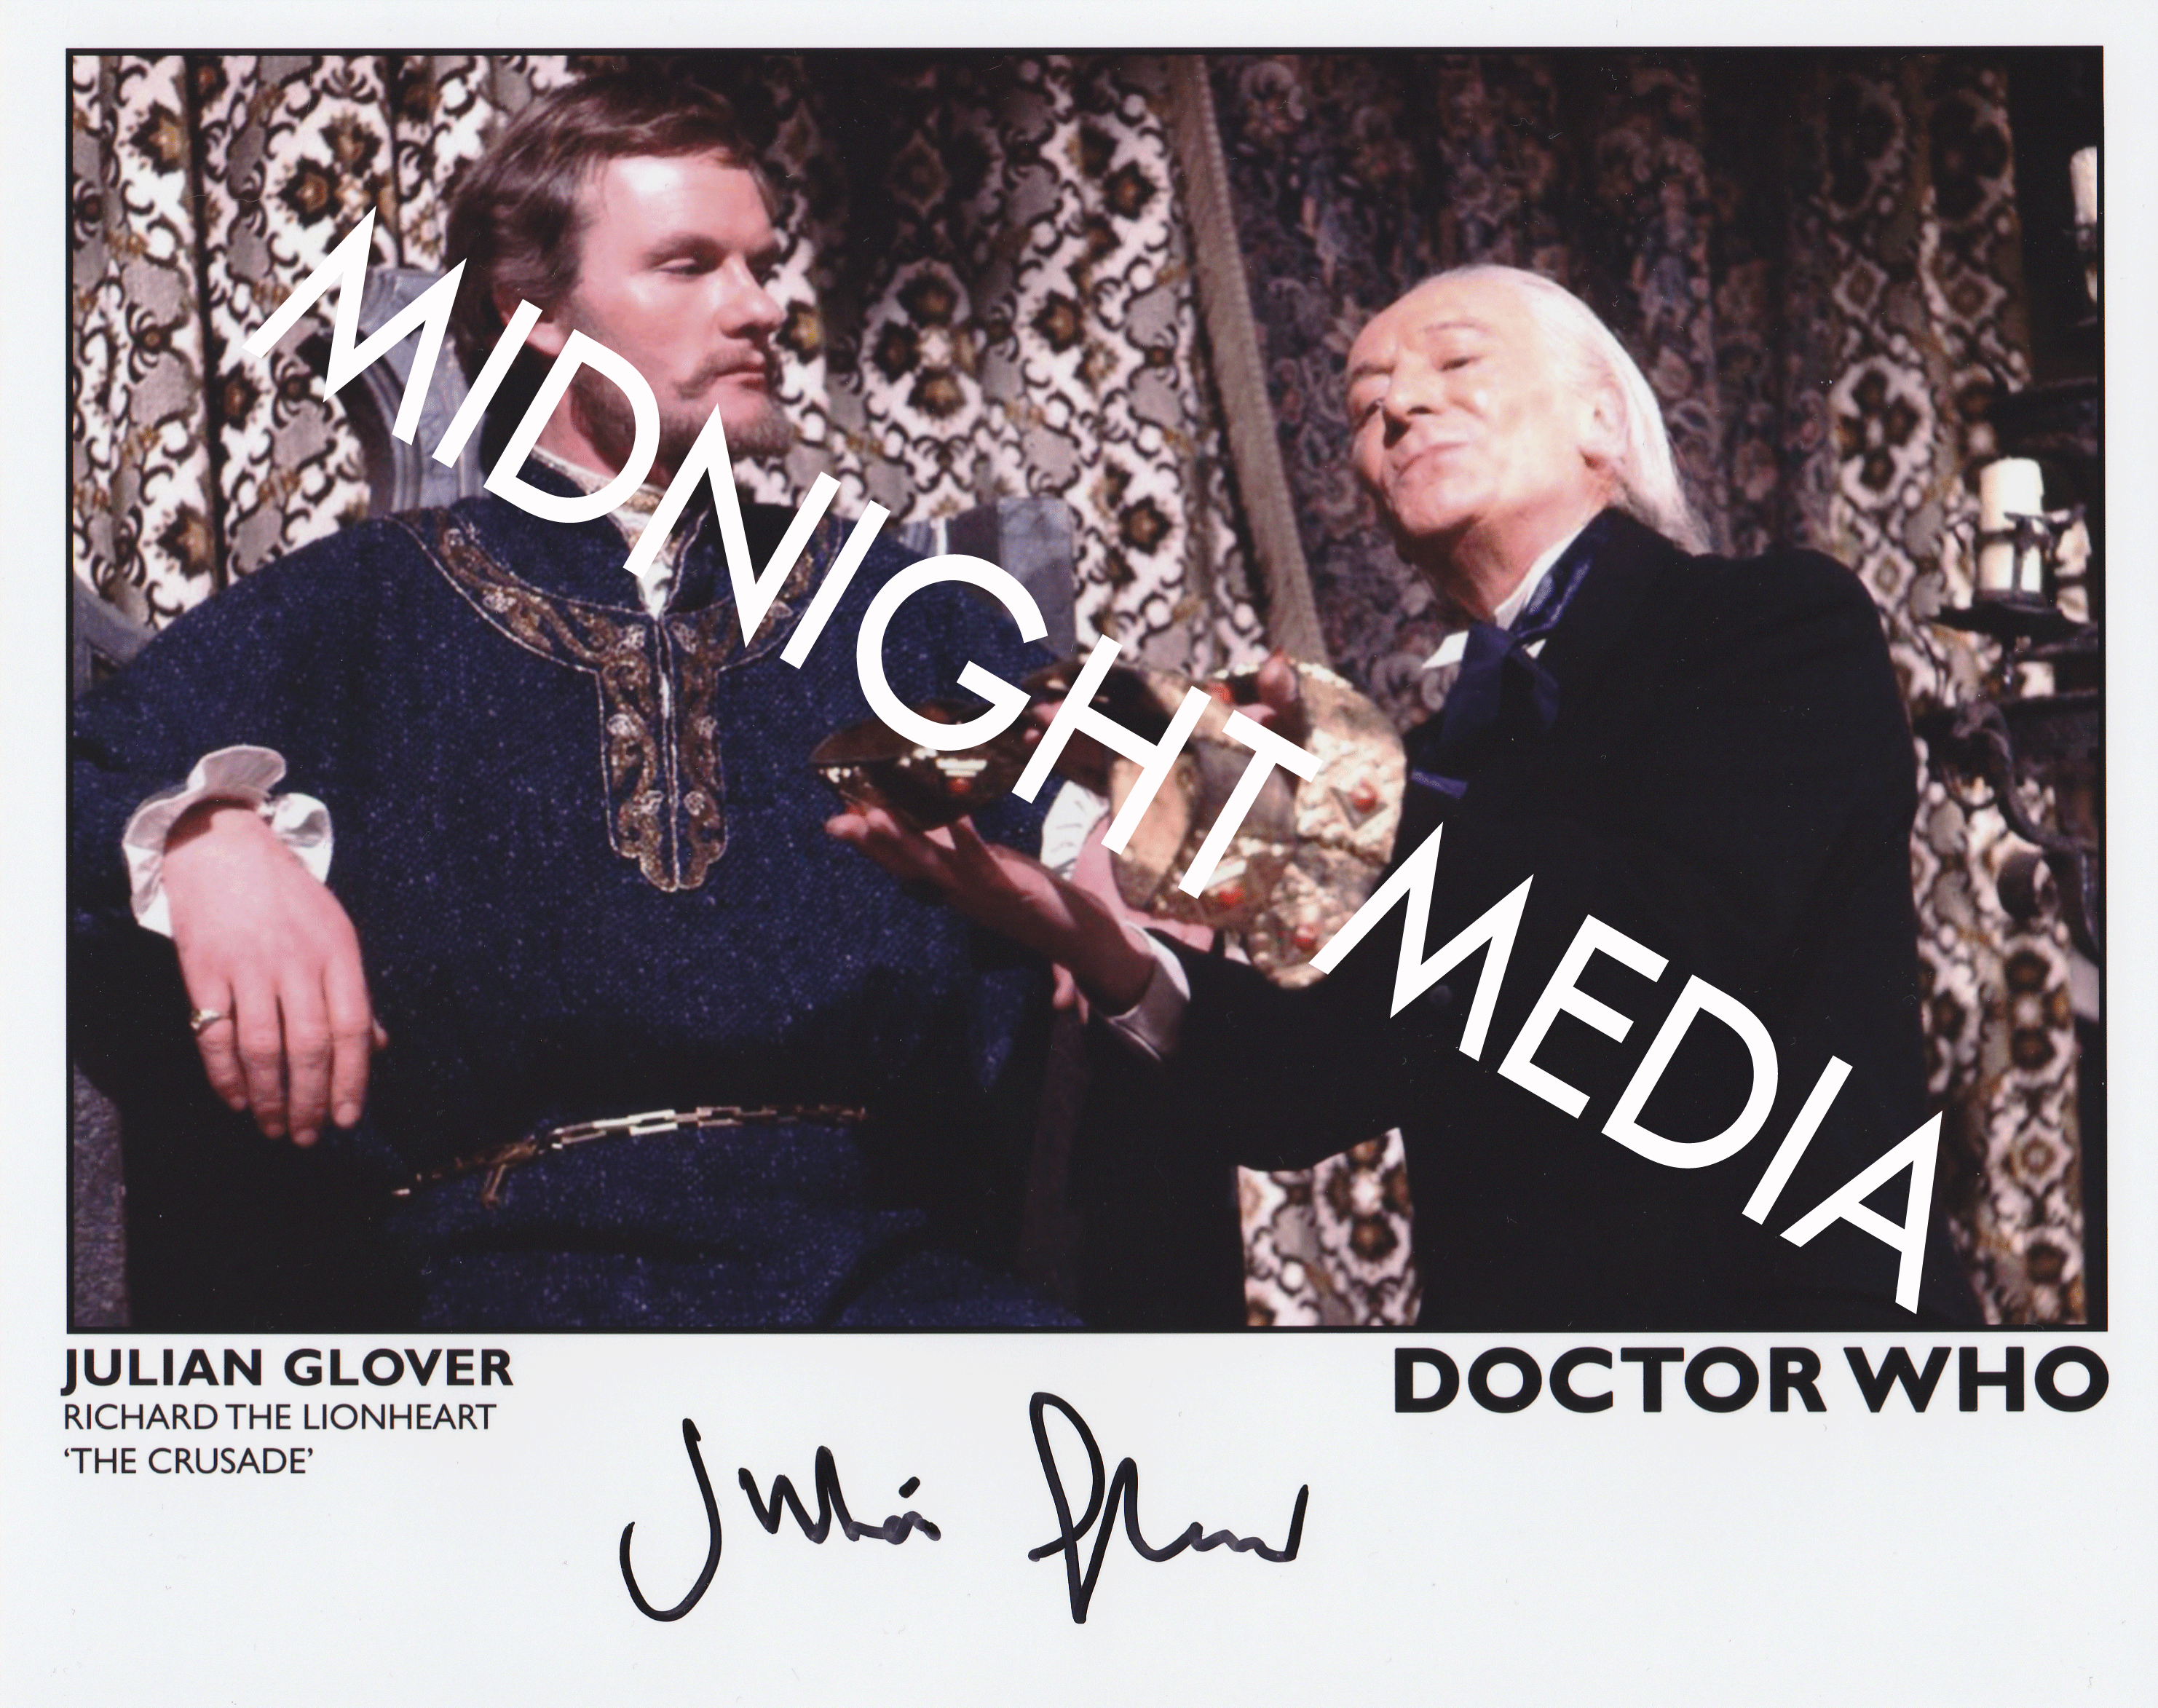 JULIAN GLOVER SIGNED PHOTOGRAPH - DOCTOR WHO